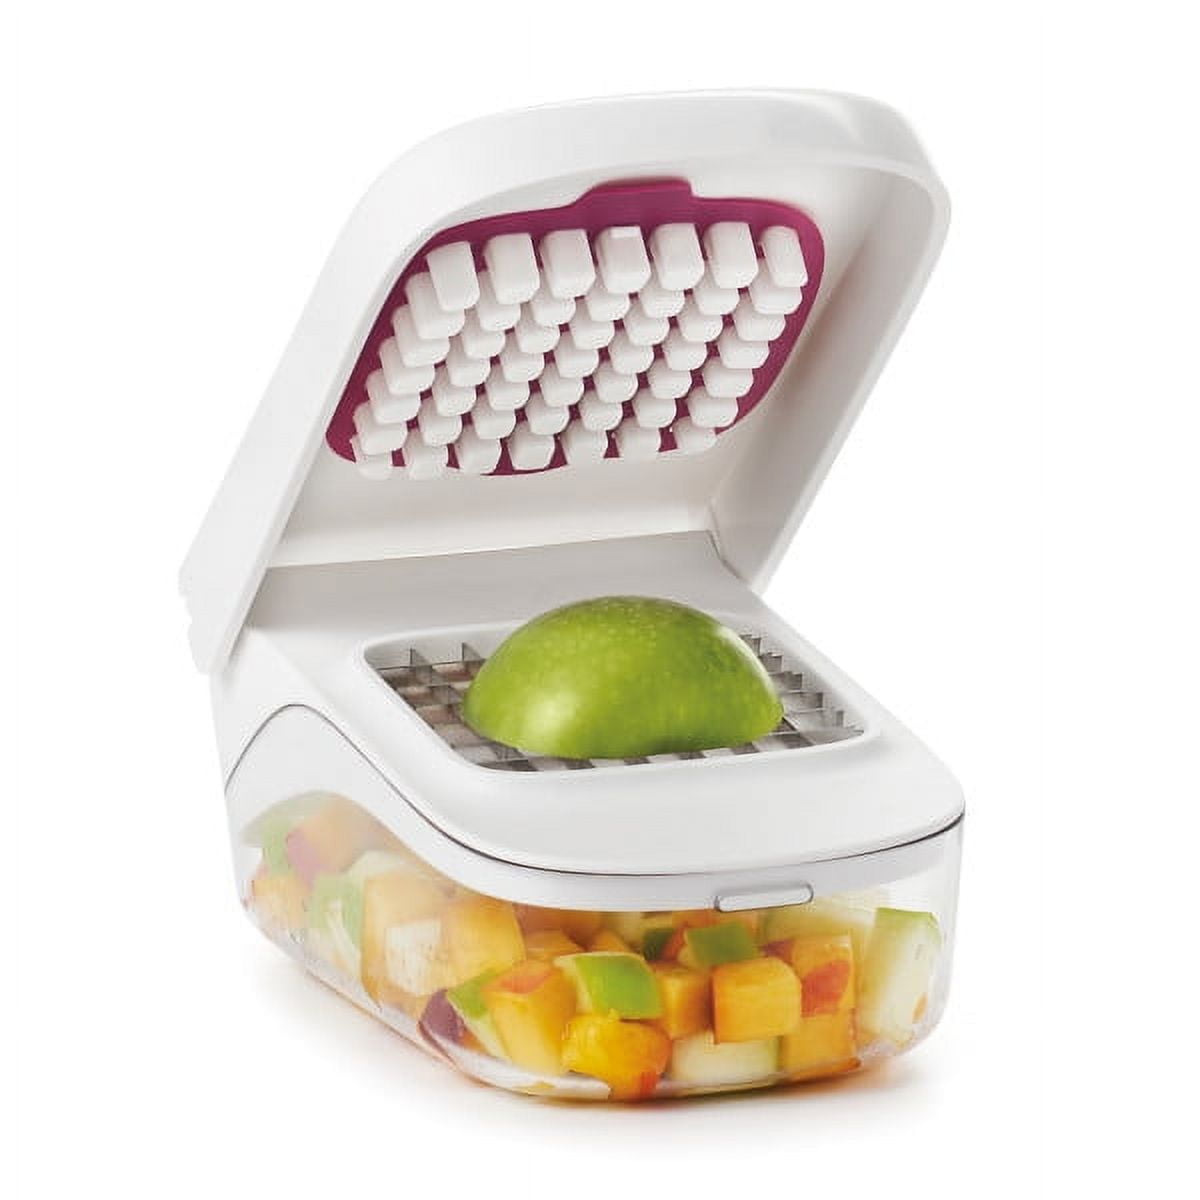 The Oxo GreenSaver Produce Keeper Is Just $15 on